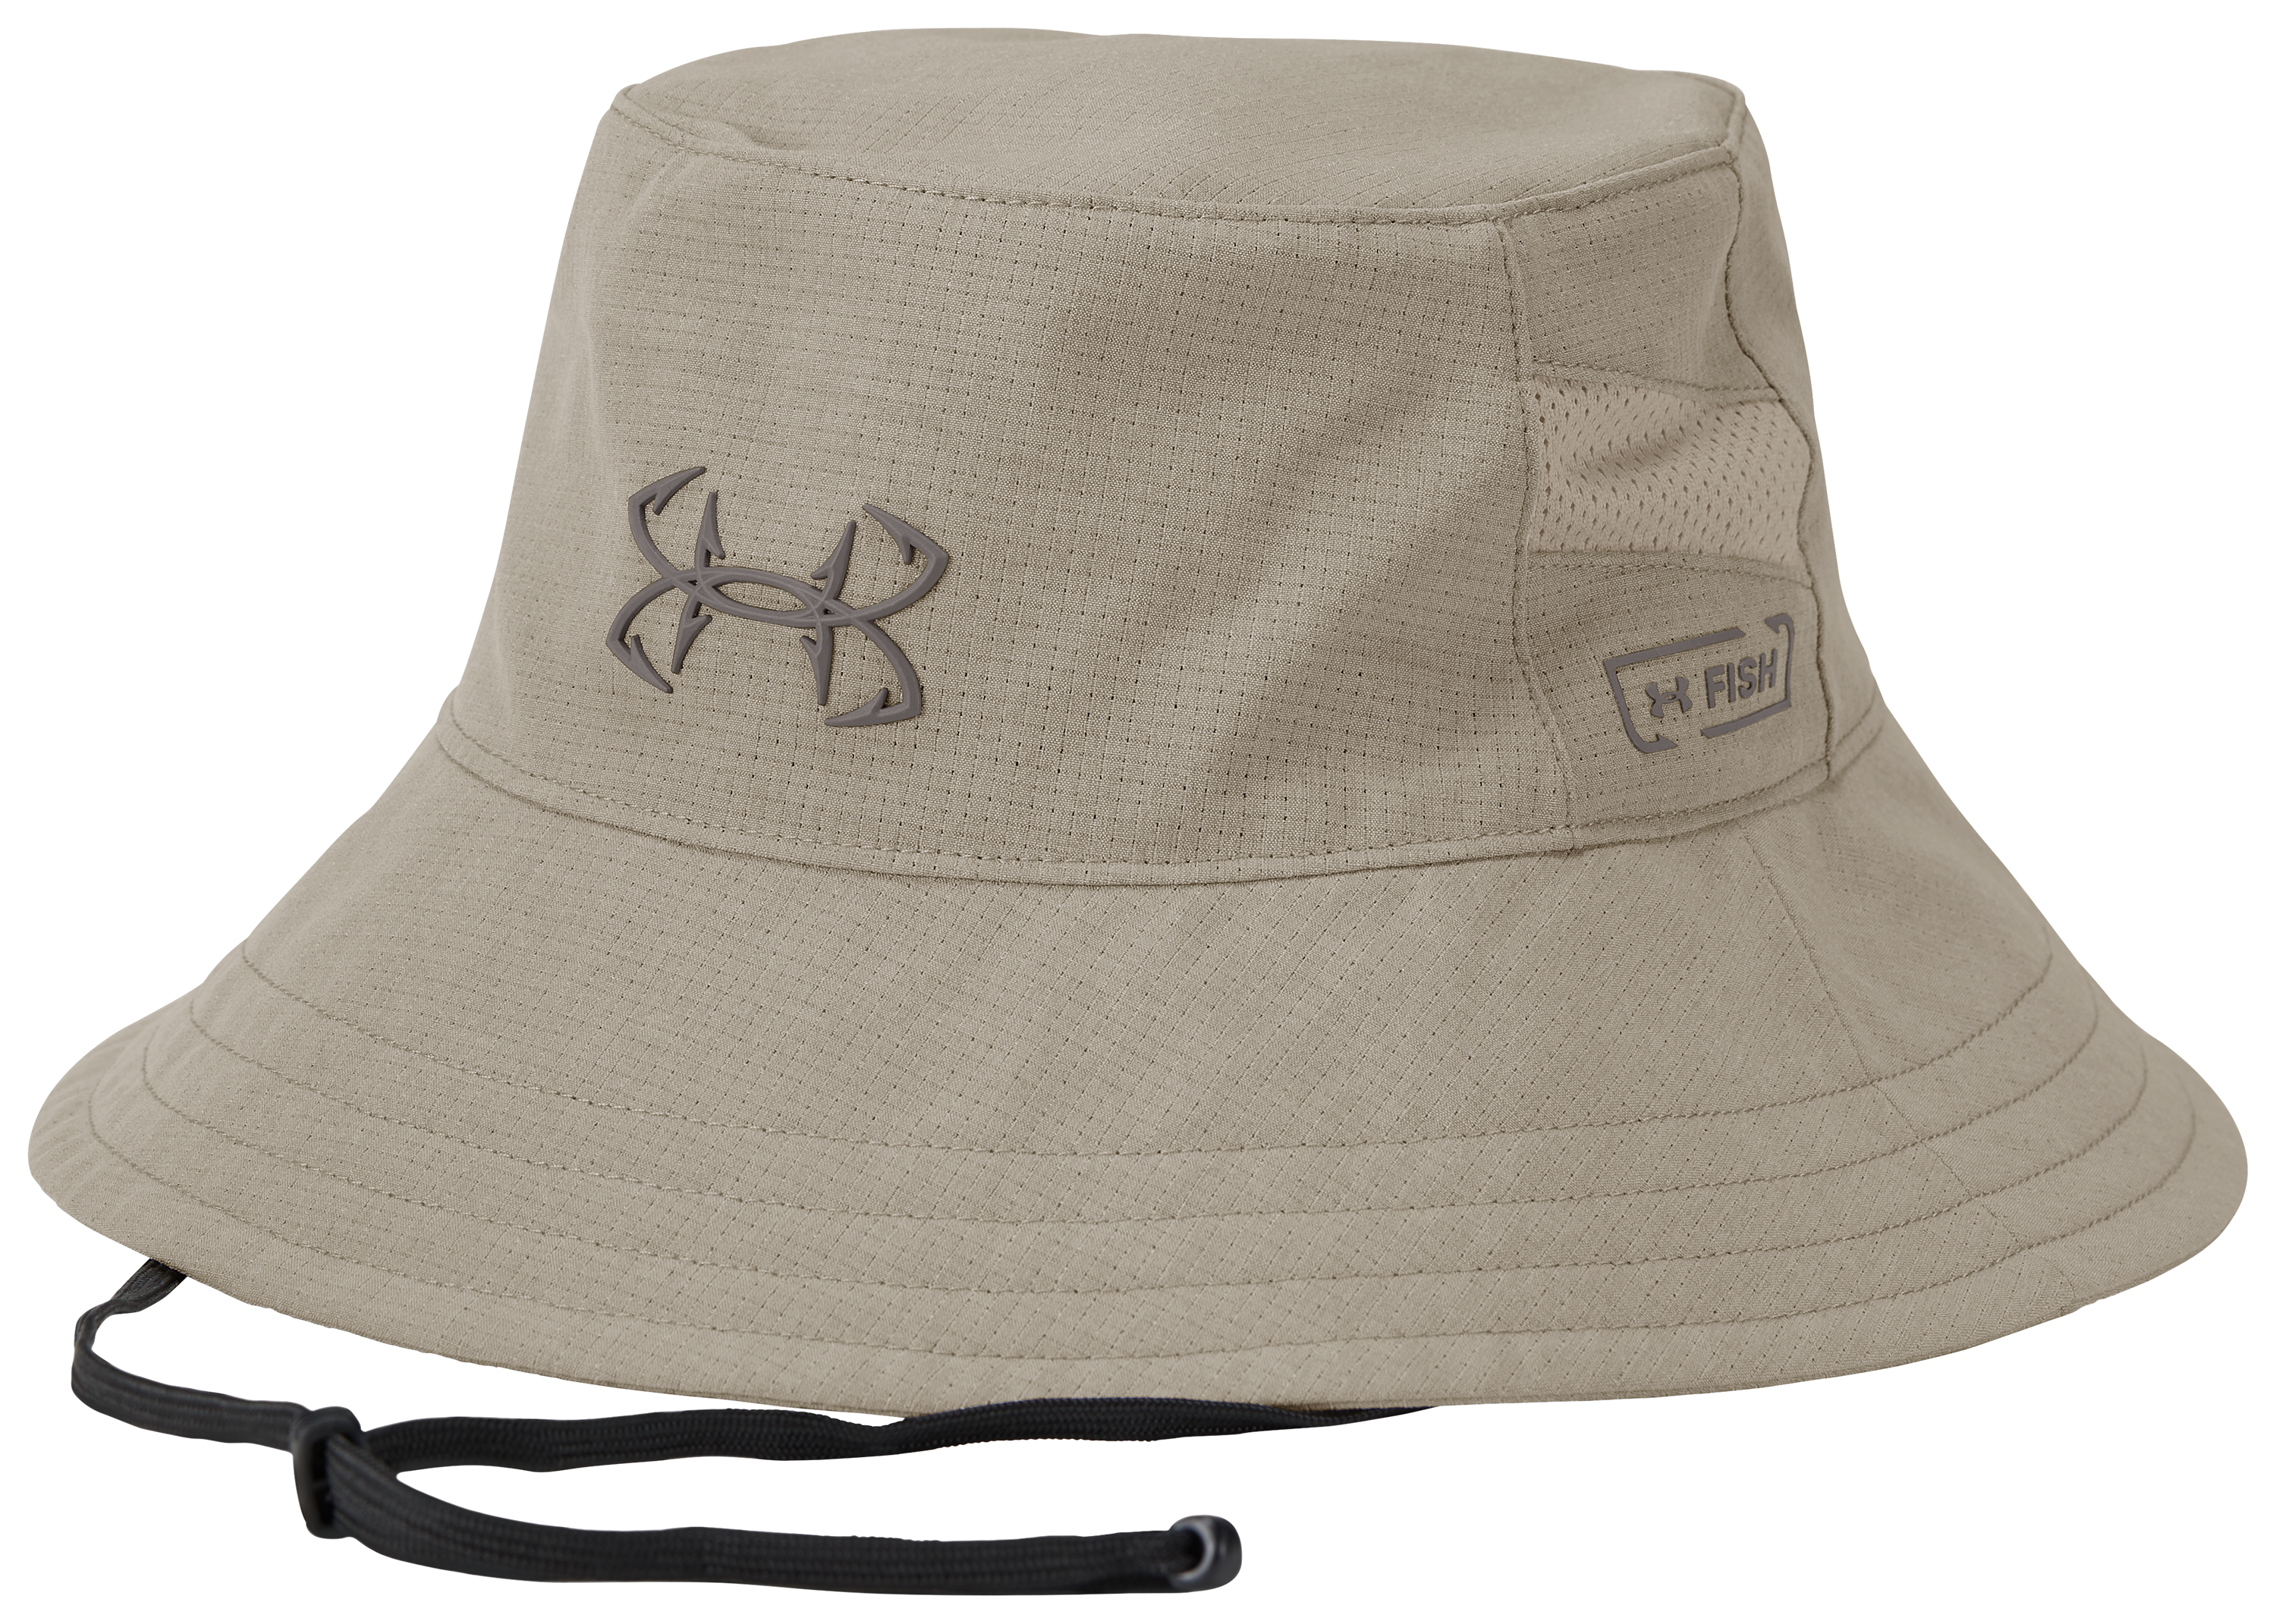 Under Armour Thermocline Bucket Hat for Men